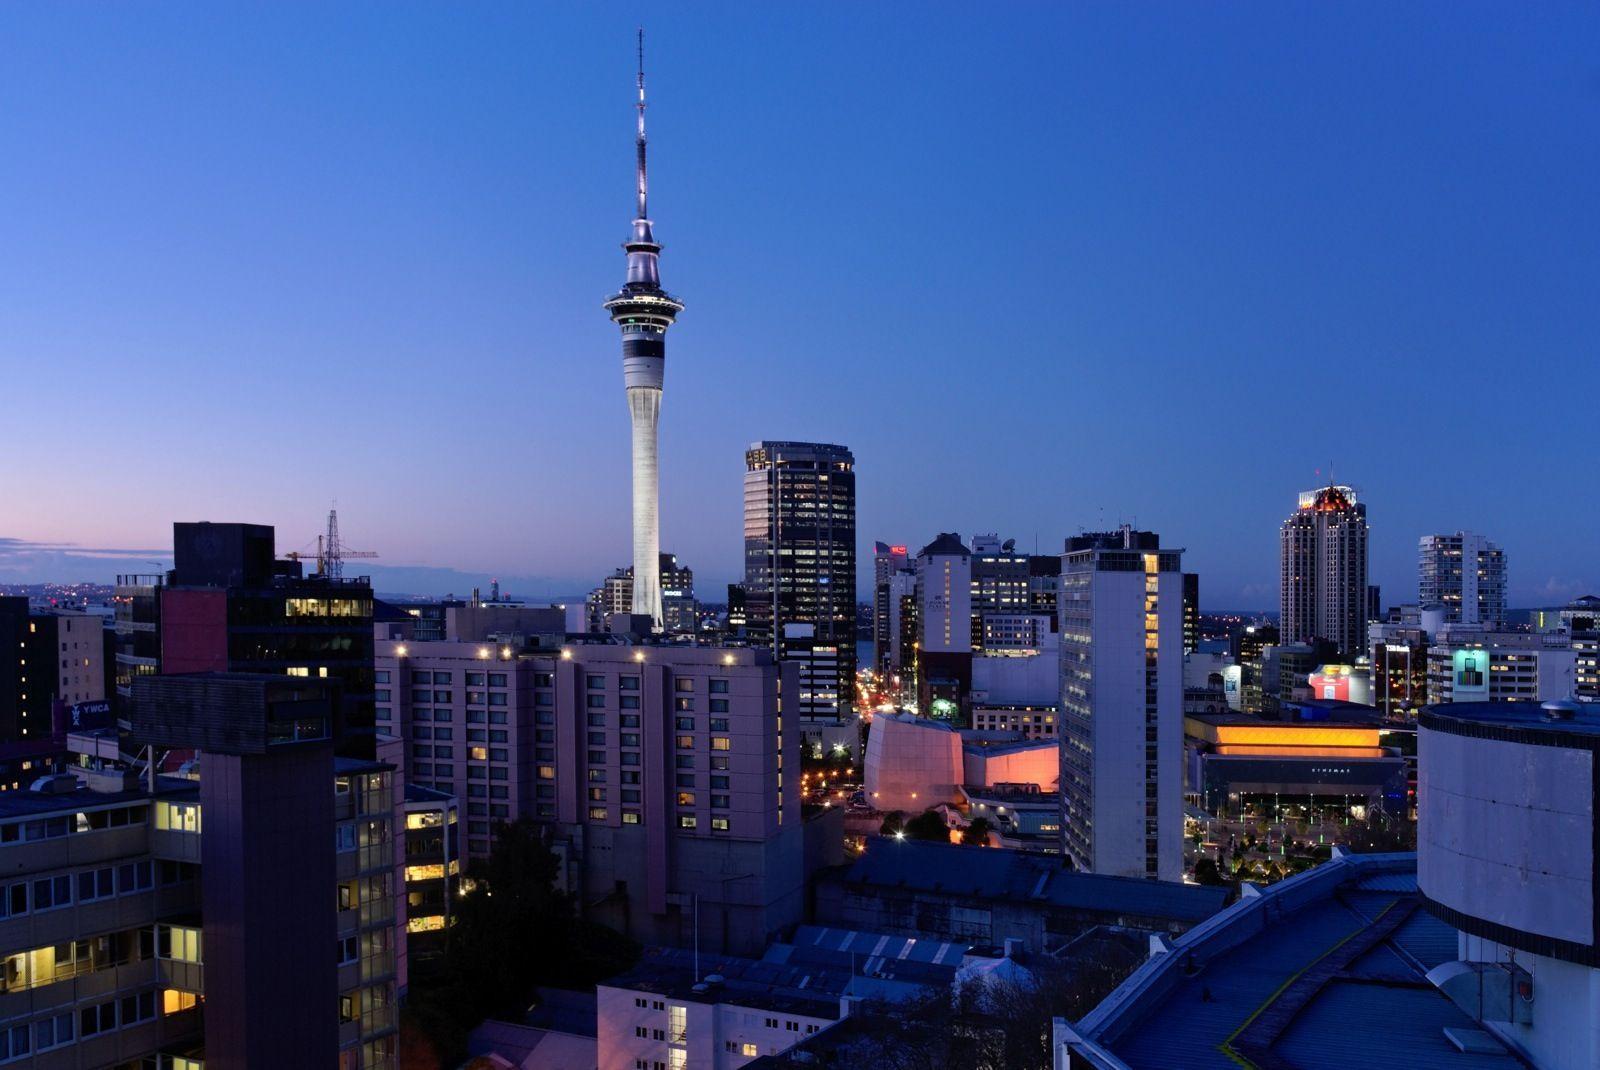 HD Auckland Wallpaper and Photo. HD Travel Wallpaper